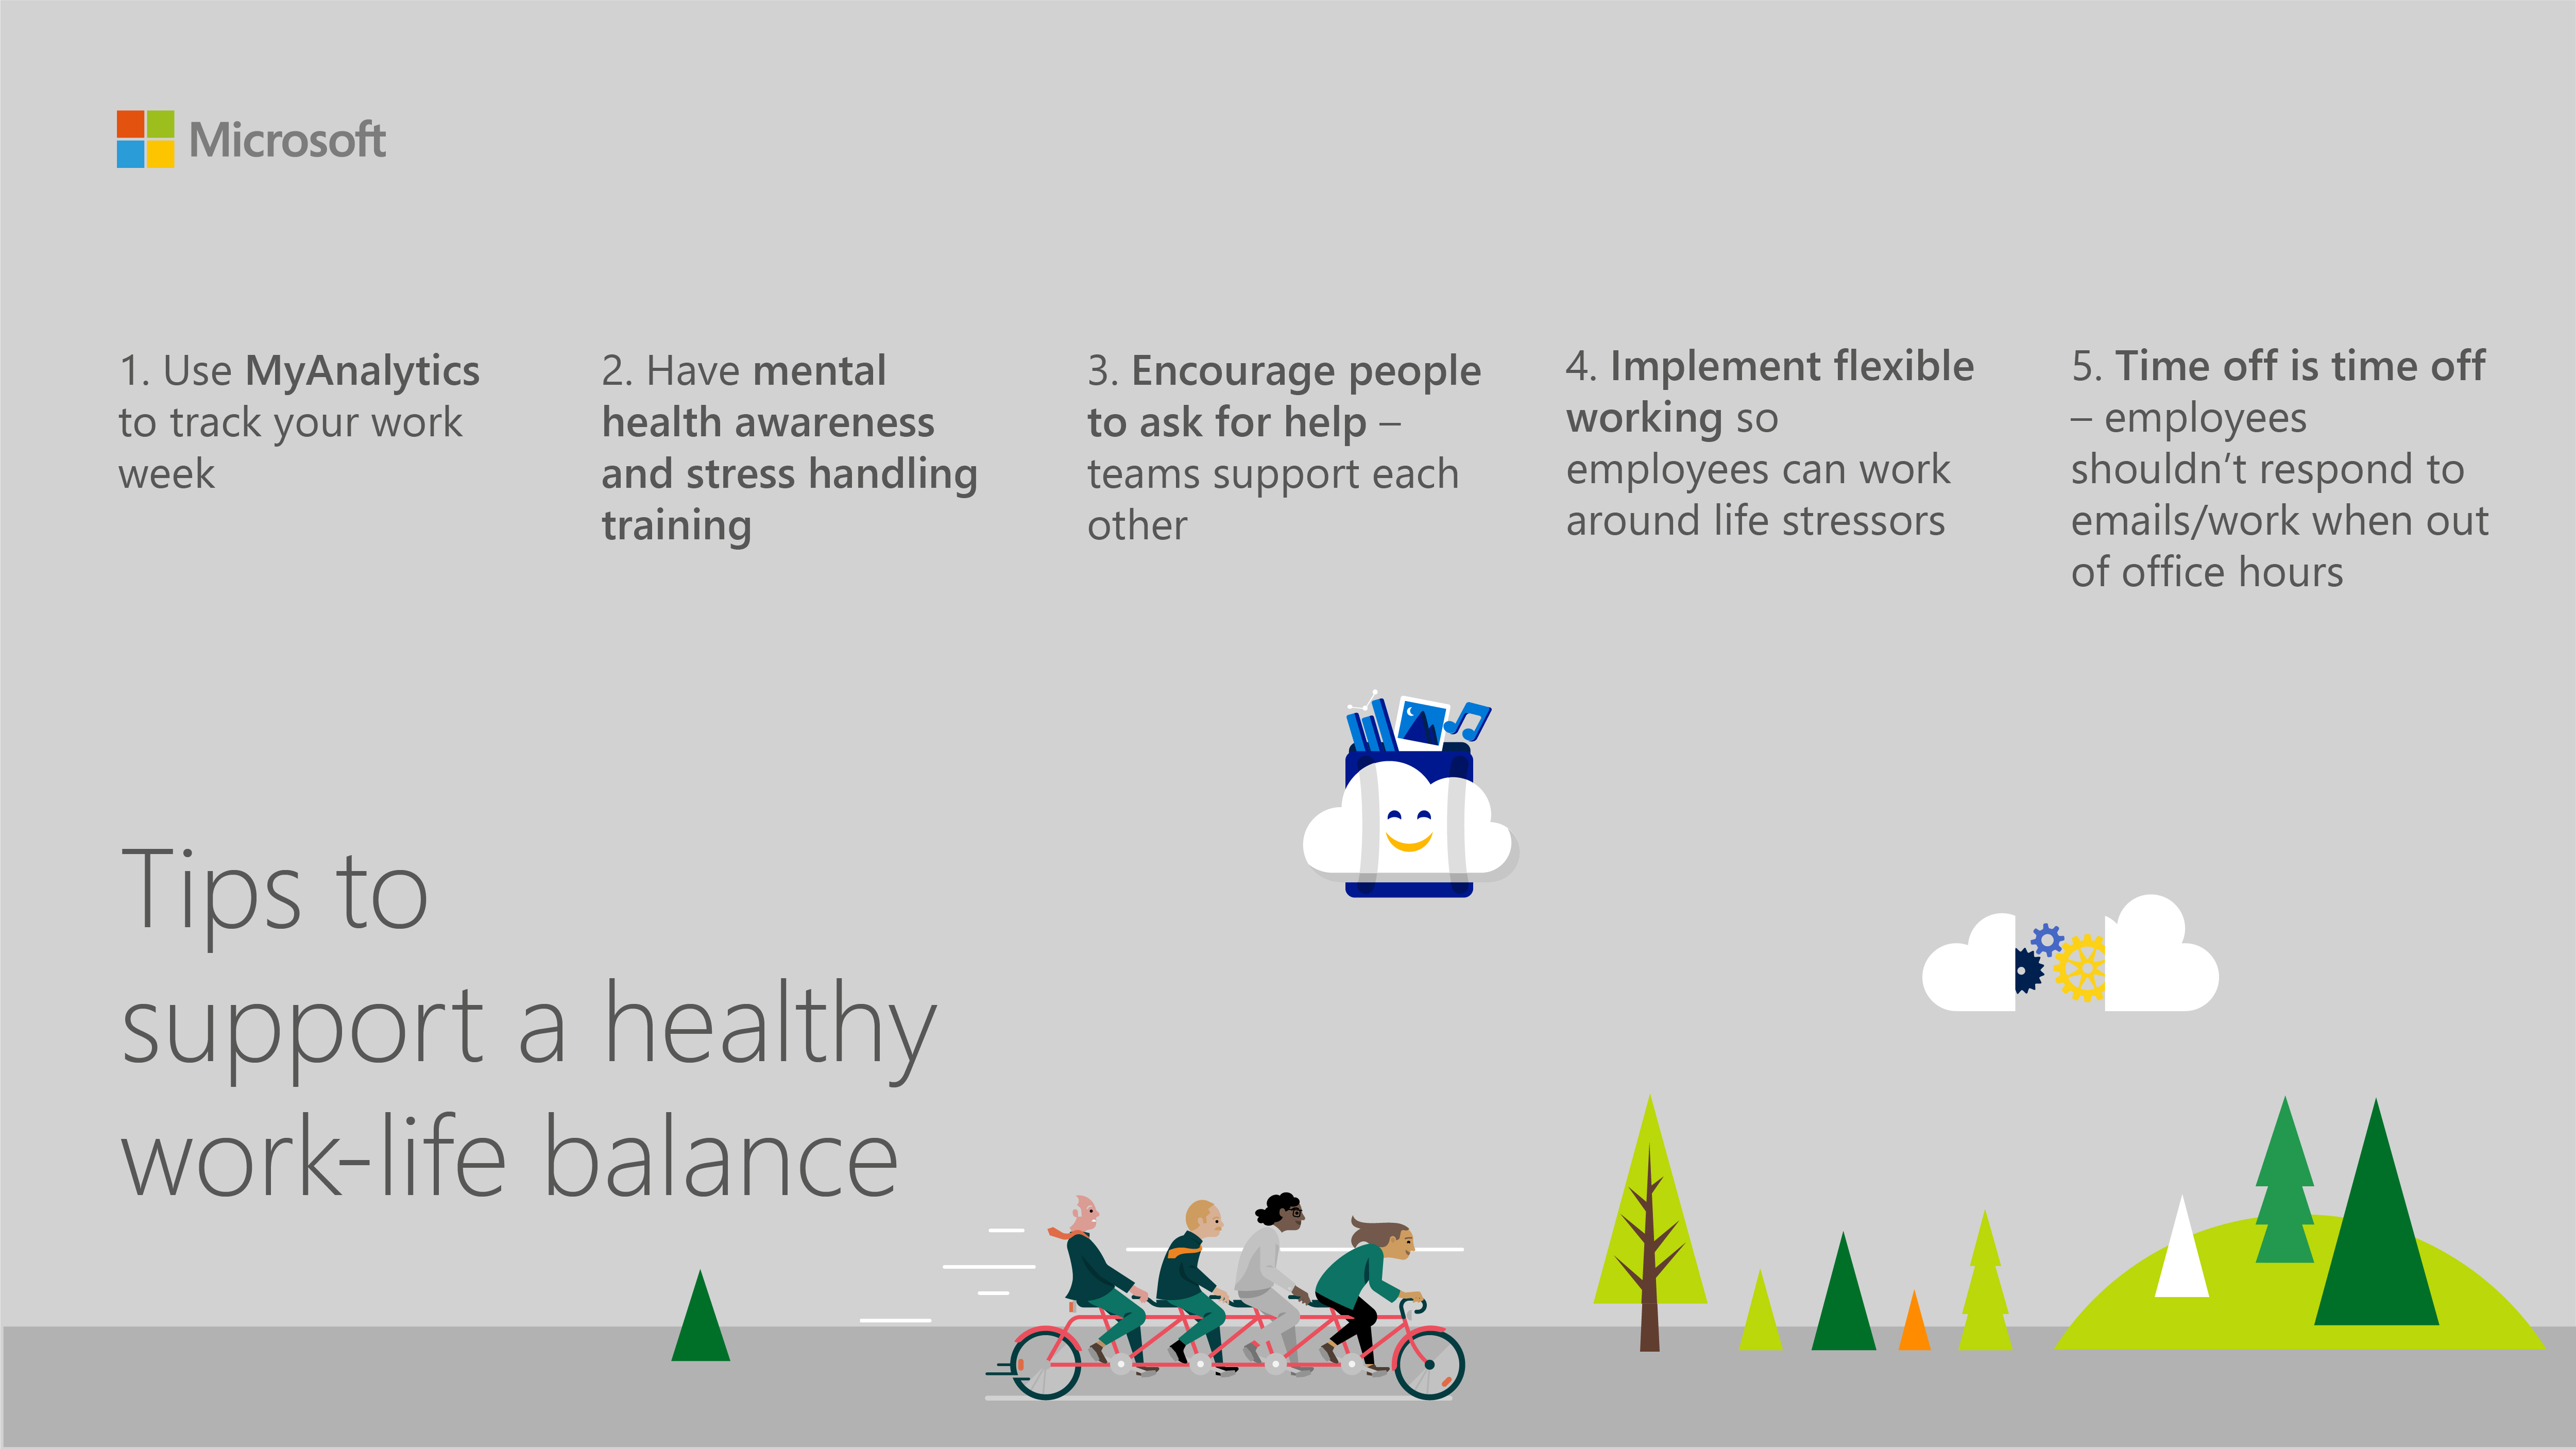 Tips to encourage a healthy work-life balance